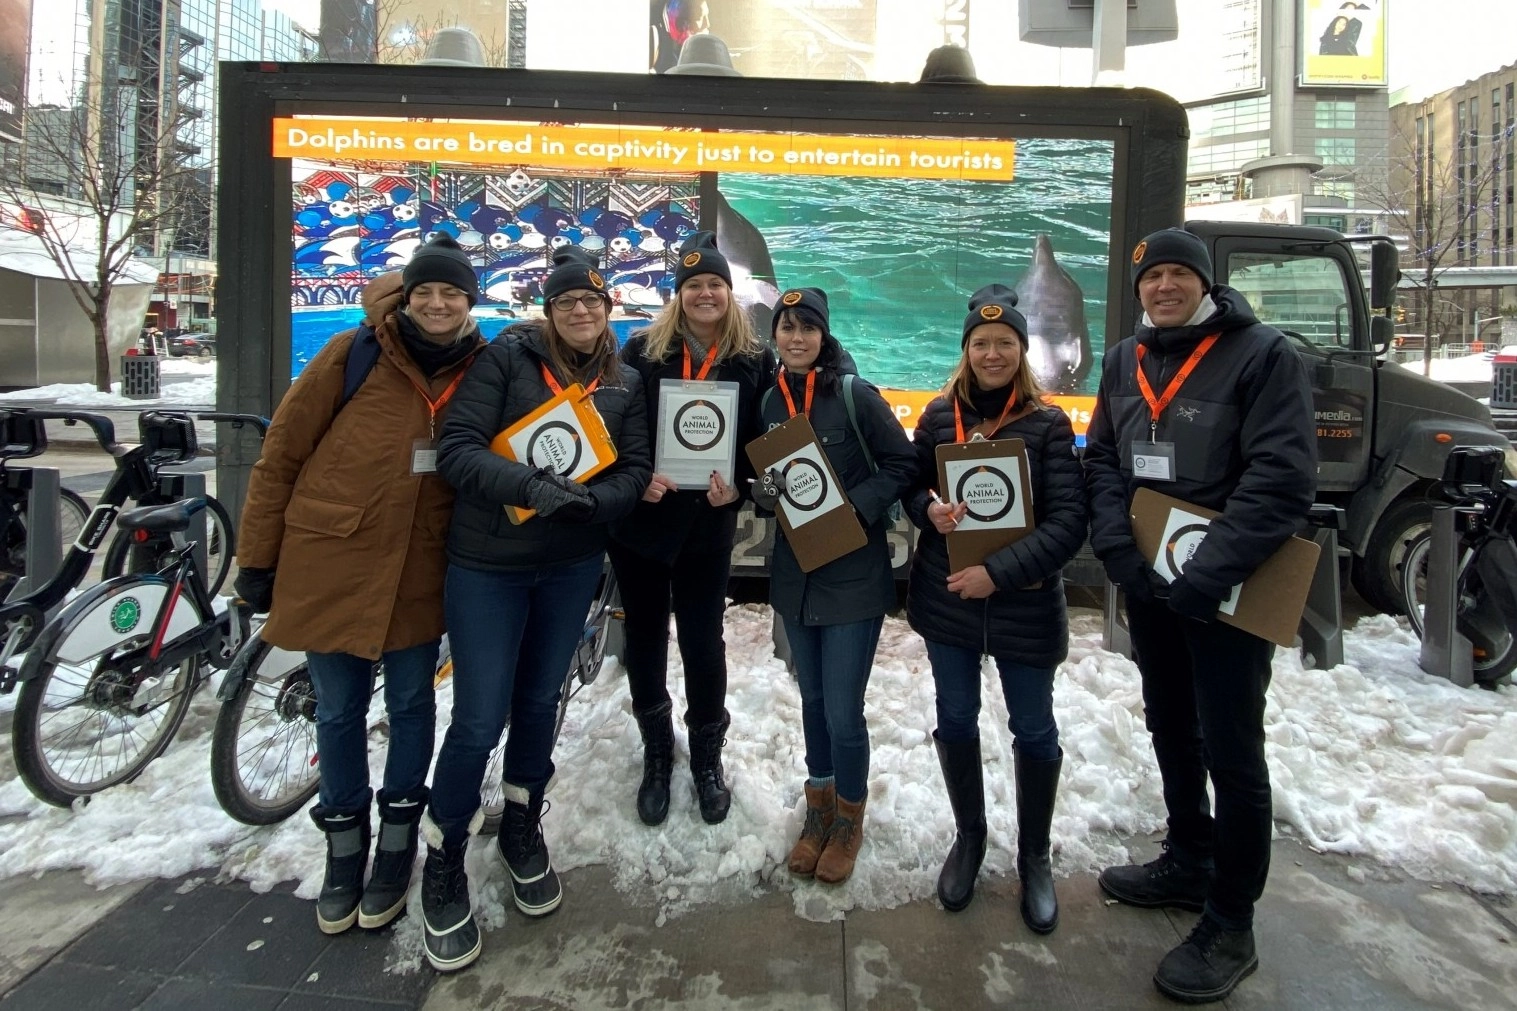 Pictured: World Animal Protection Canada team campaigning on the streets.